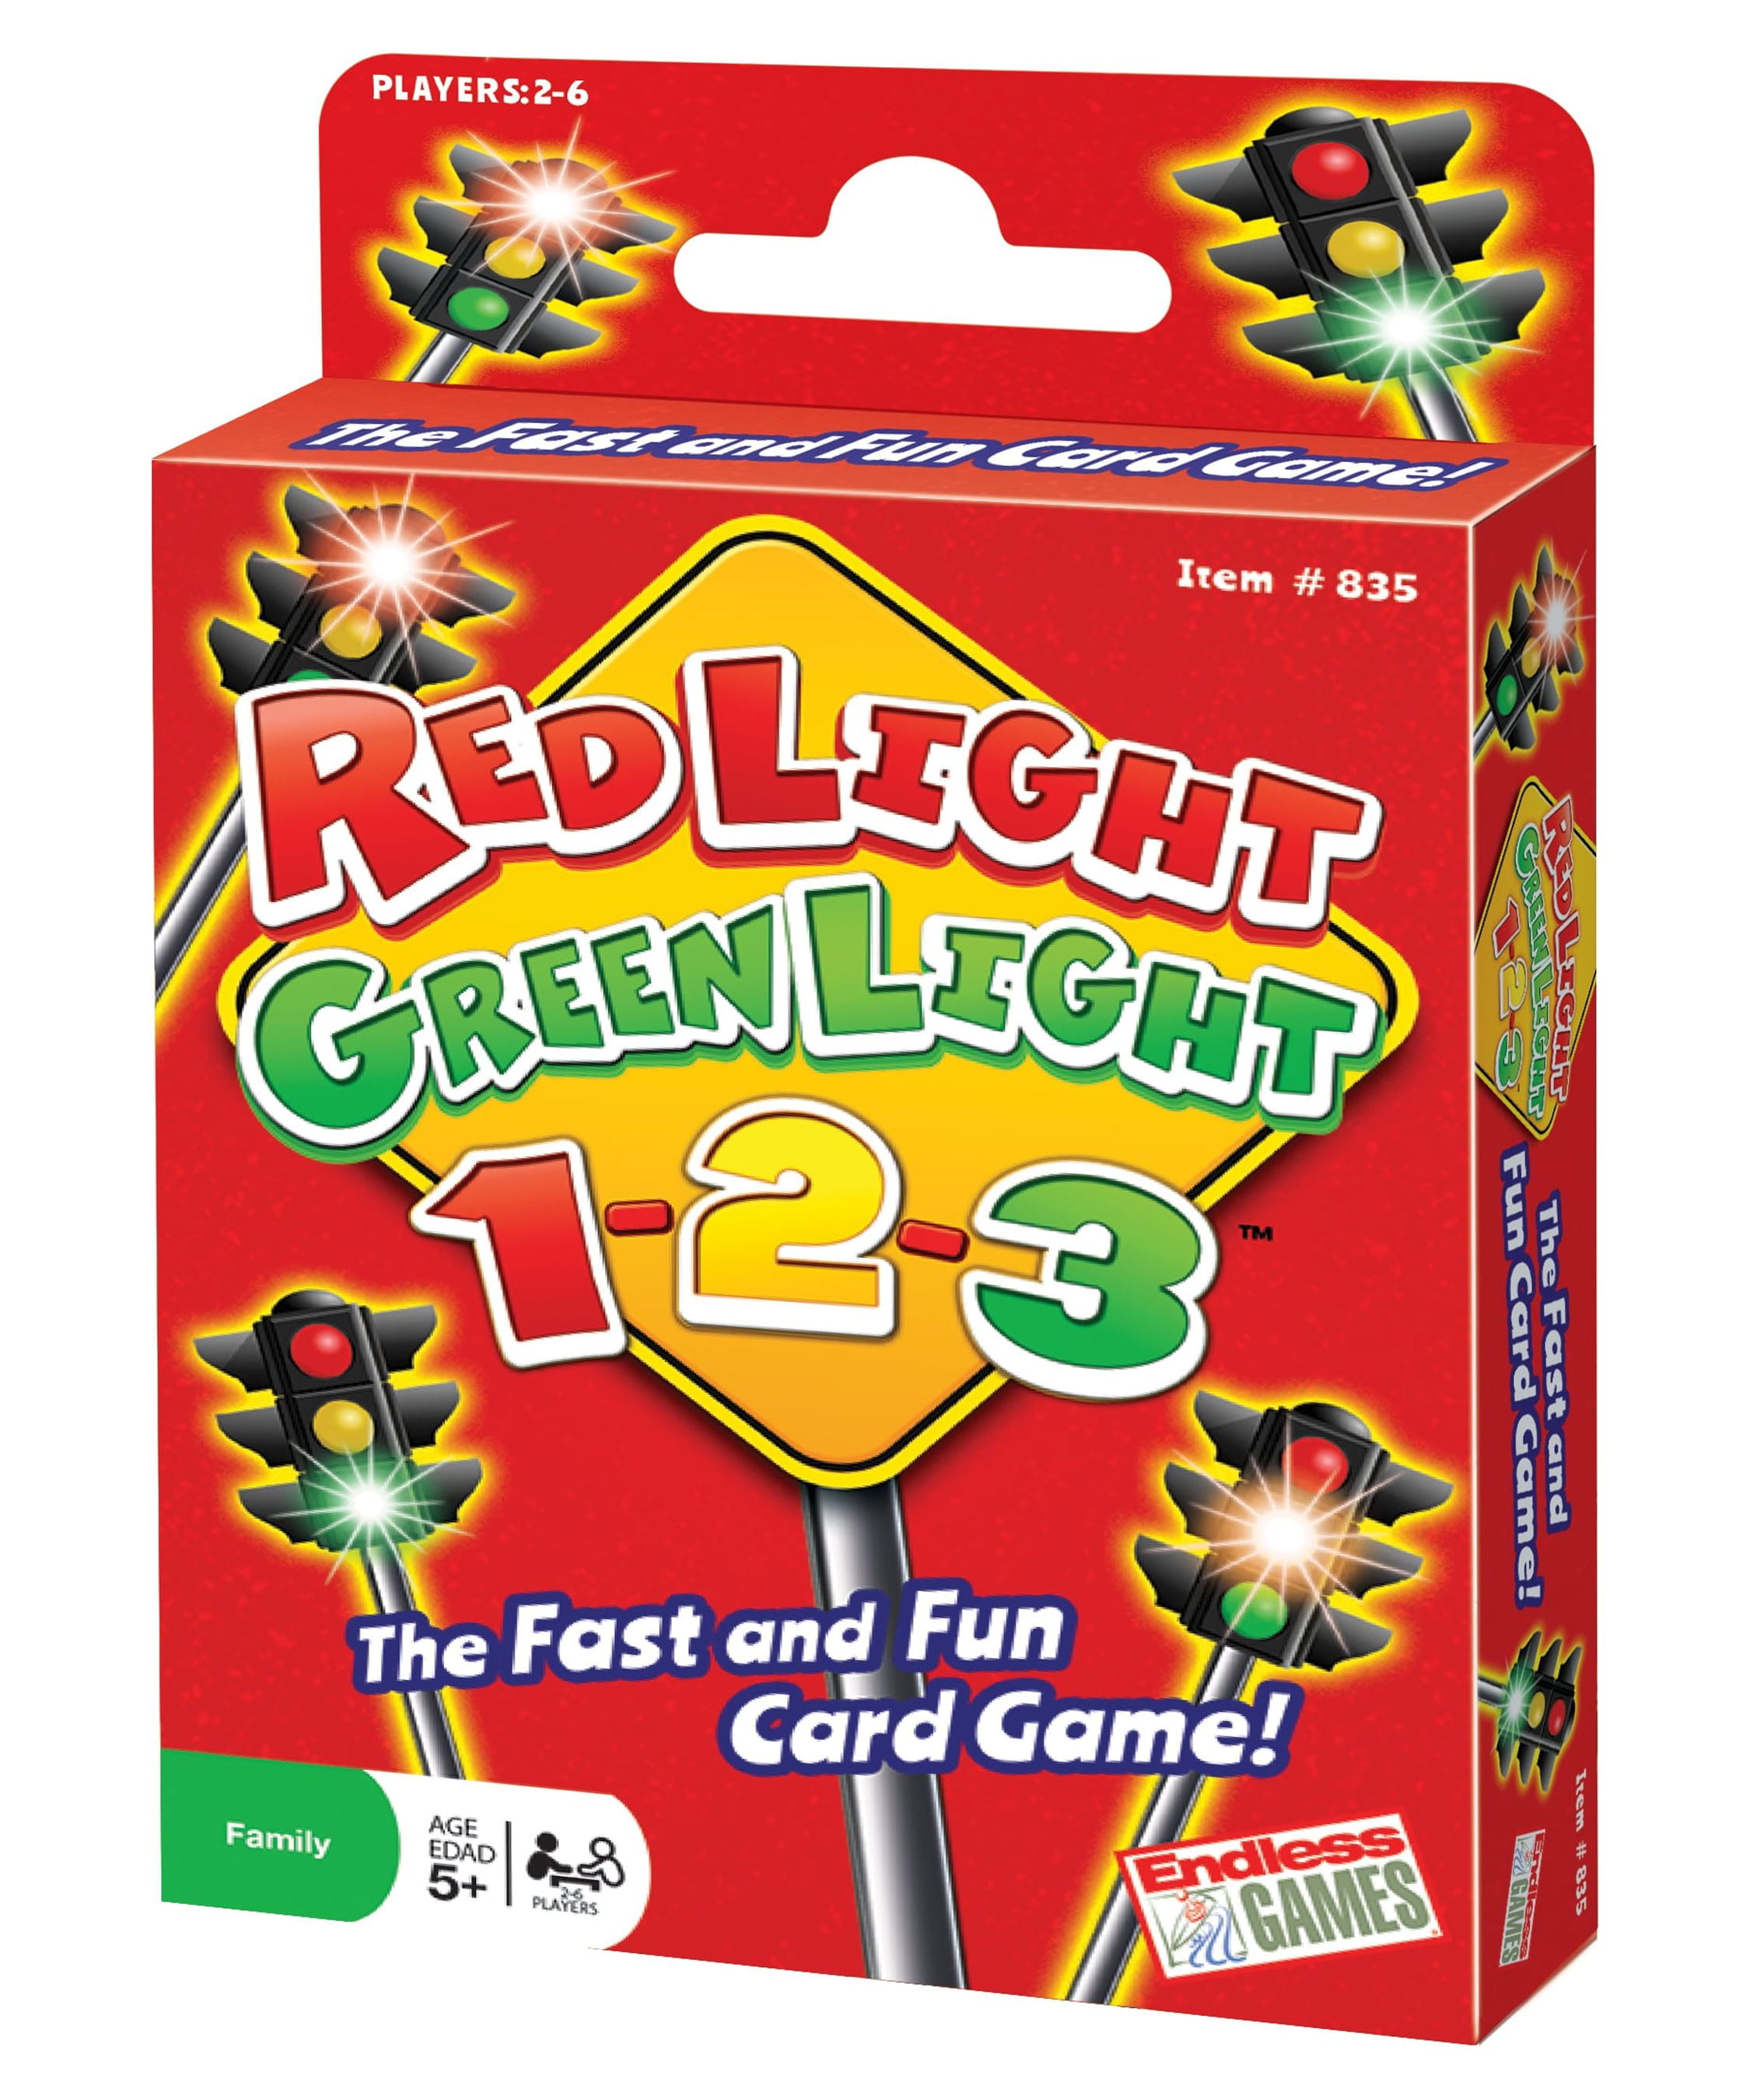 /games/images/red-and-green-2-cand